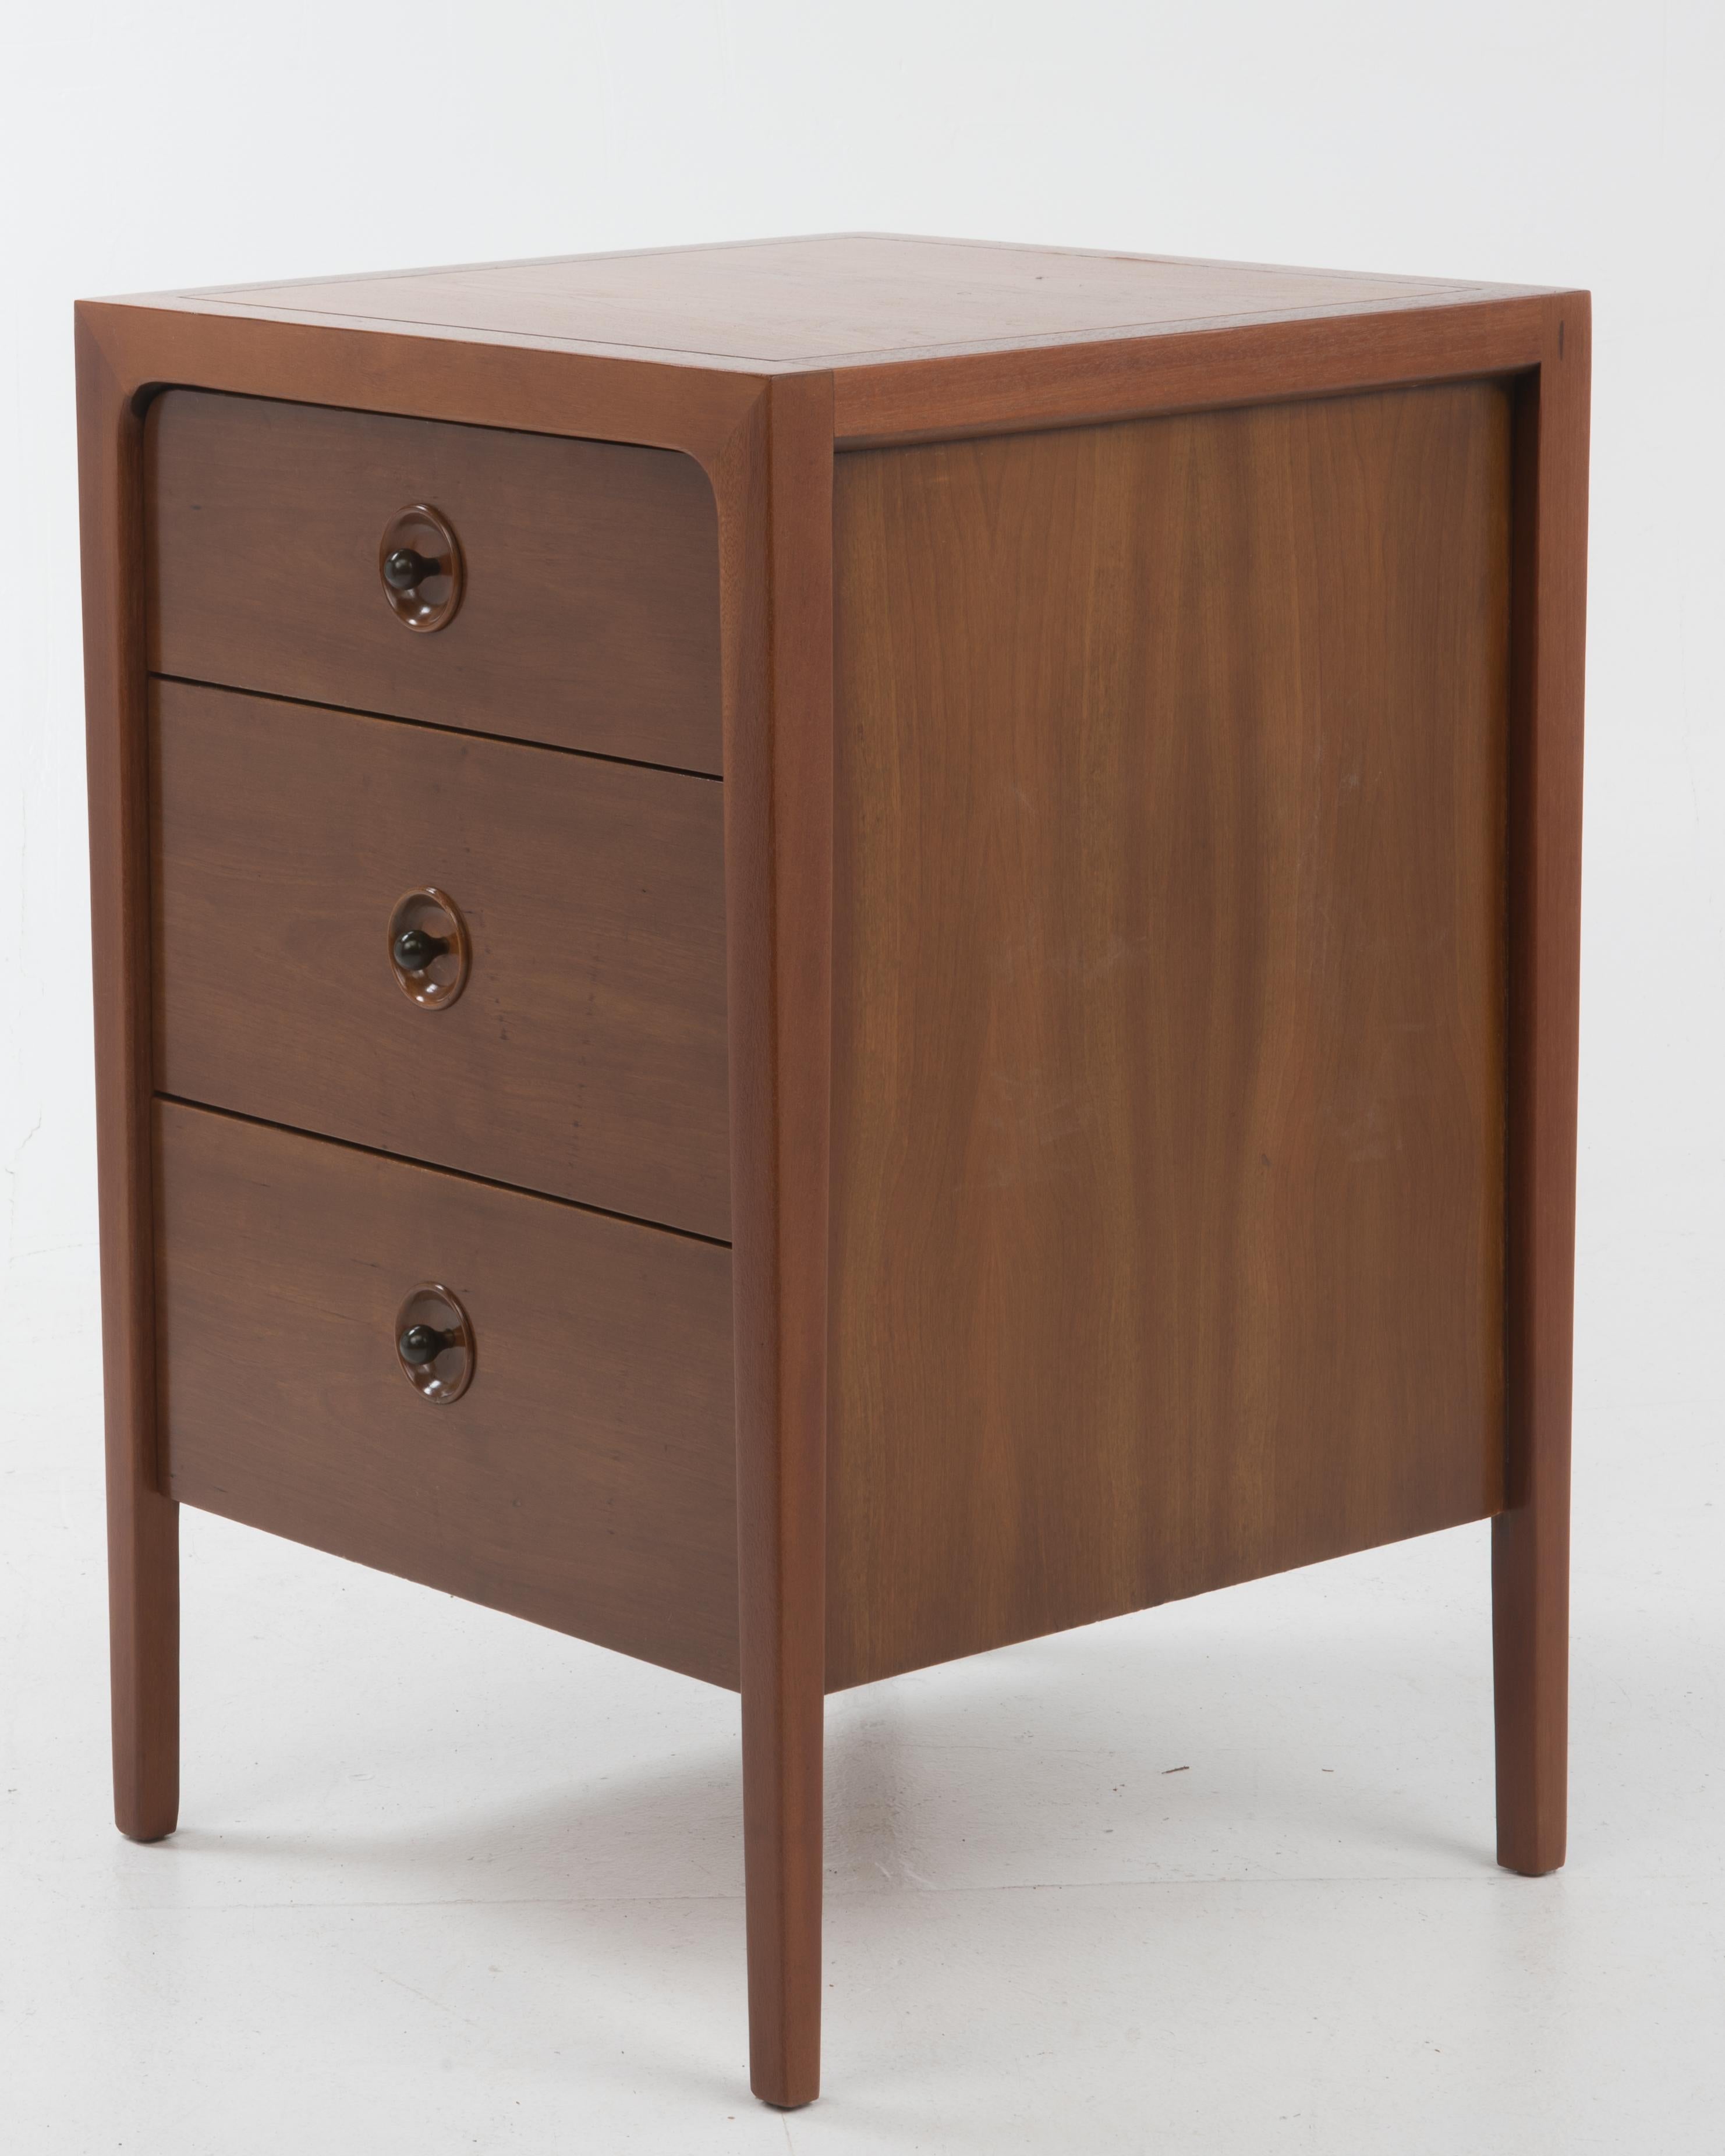 Drexel counterpoint small dresser night stand John Van Koert Cherry Mahogany mid century 1950s. A mid century Drexel counterpoint narrow dresser night stand designed by John Van Koert (1956). The cabinet is made of wild-grained cherry offset by